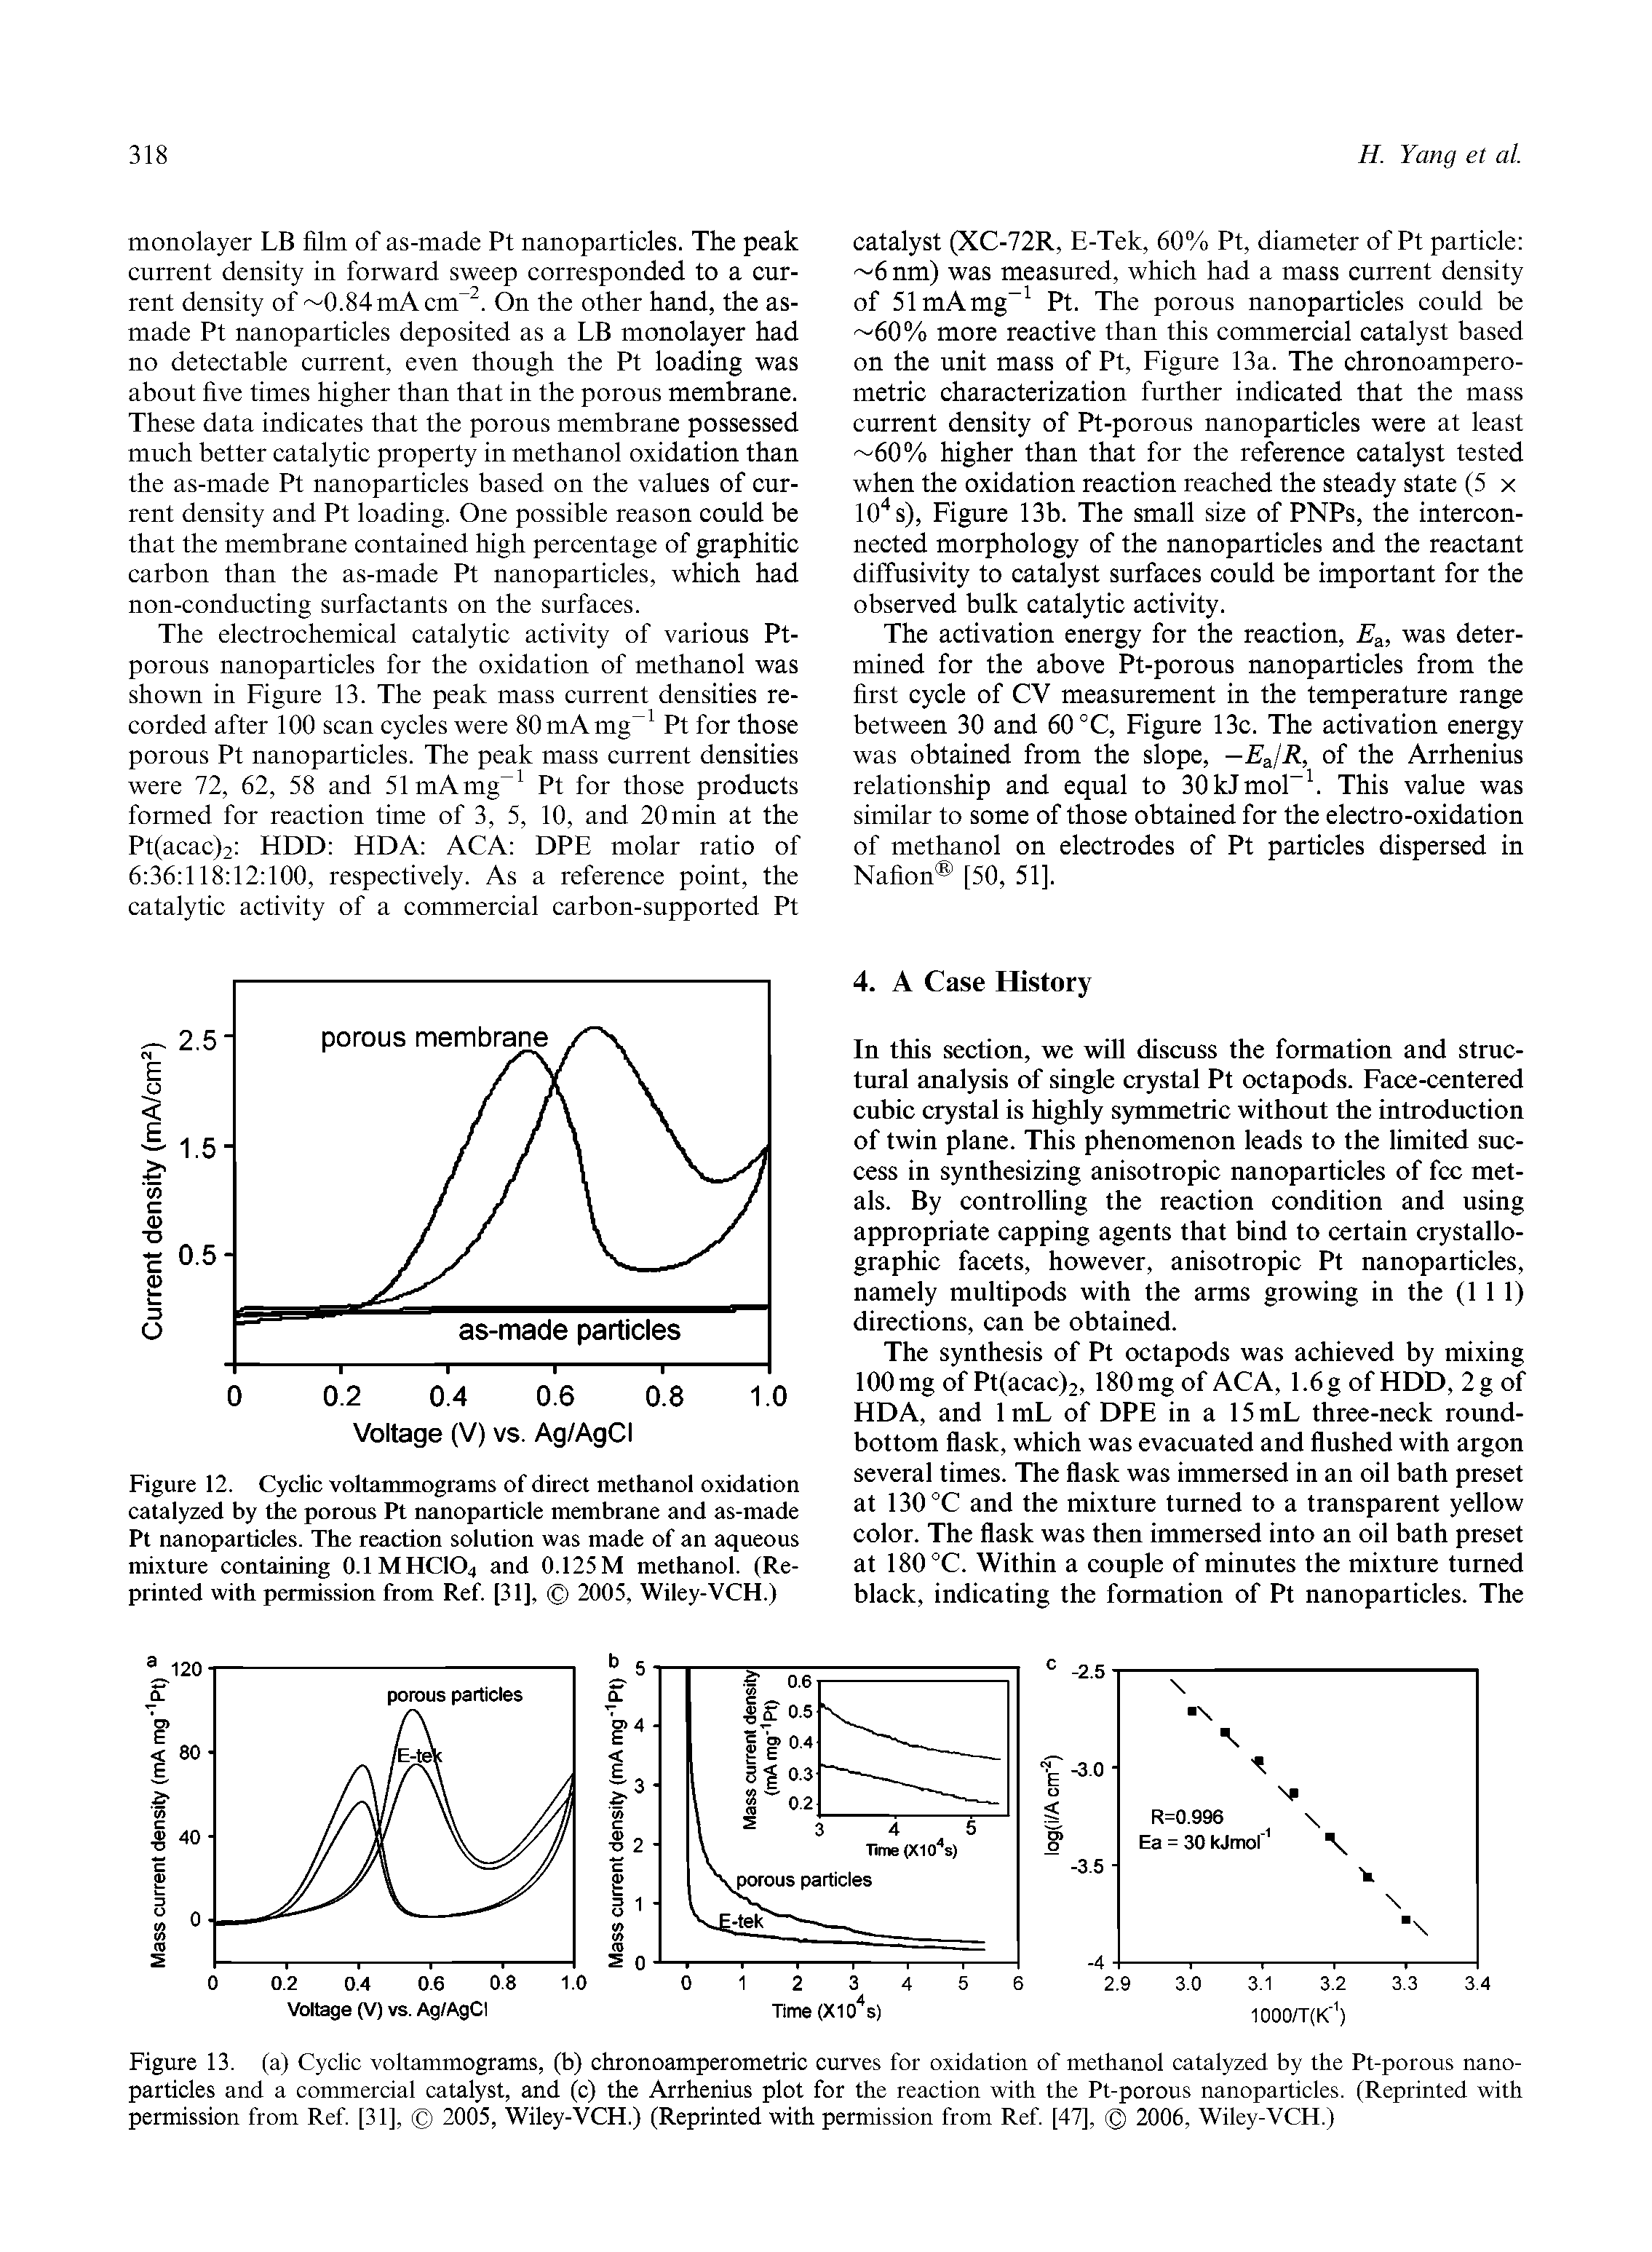 Figure 12. Cyclic voltammograms of direct methanol oxidation catalyzed by the porous Pt nanoparticle membrane and as-made Pt nanoparticles. The reaction solution was made of an aqueous mixture containing O.IMHCIO4 and 0.125 M methanol. (Reprinted with permission from Ref [31], 2005, Wiley-VCH.)...